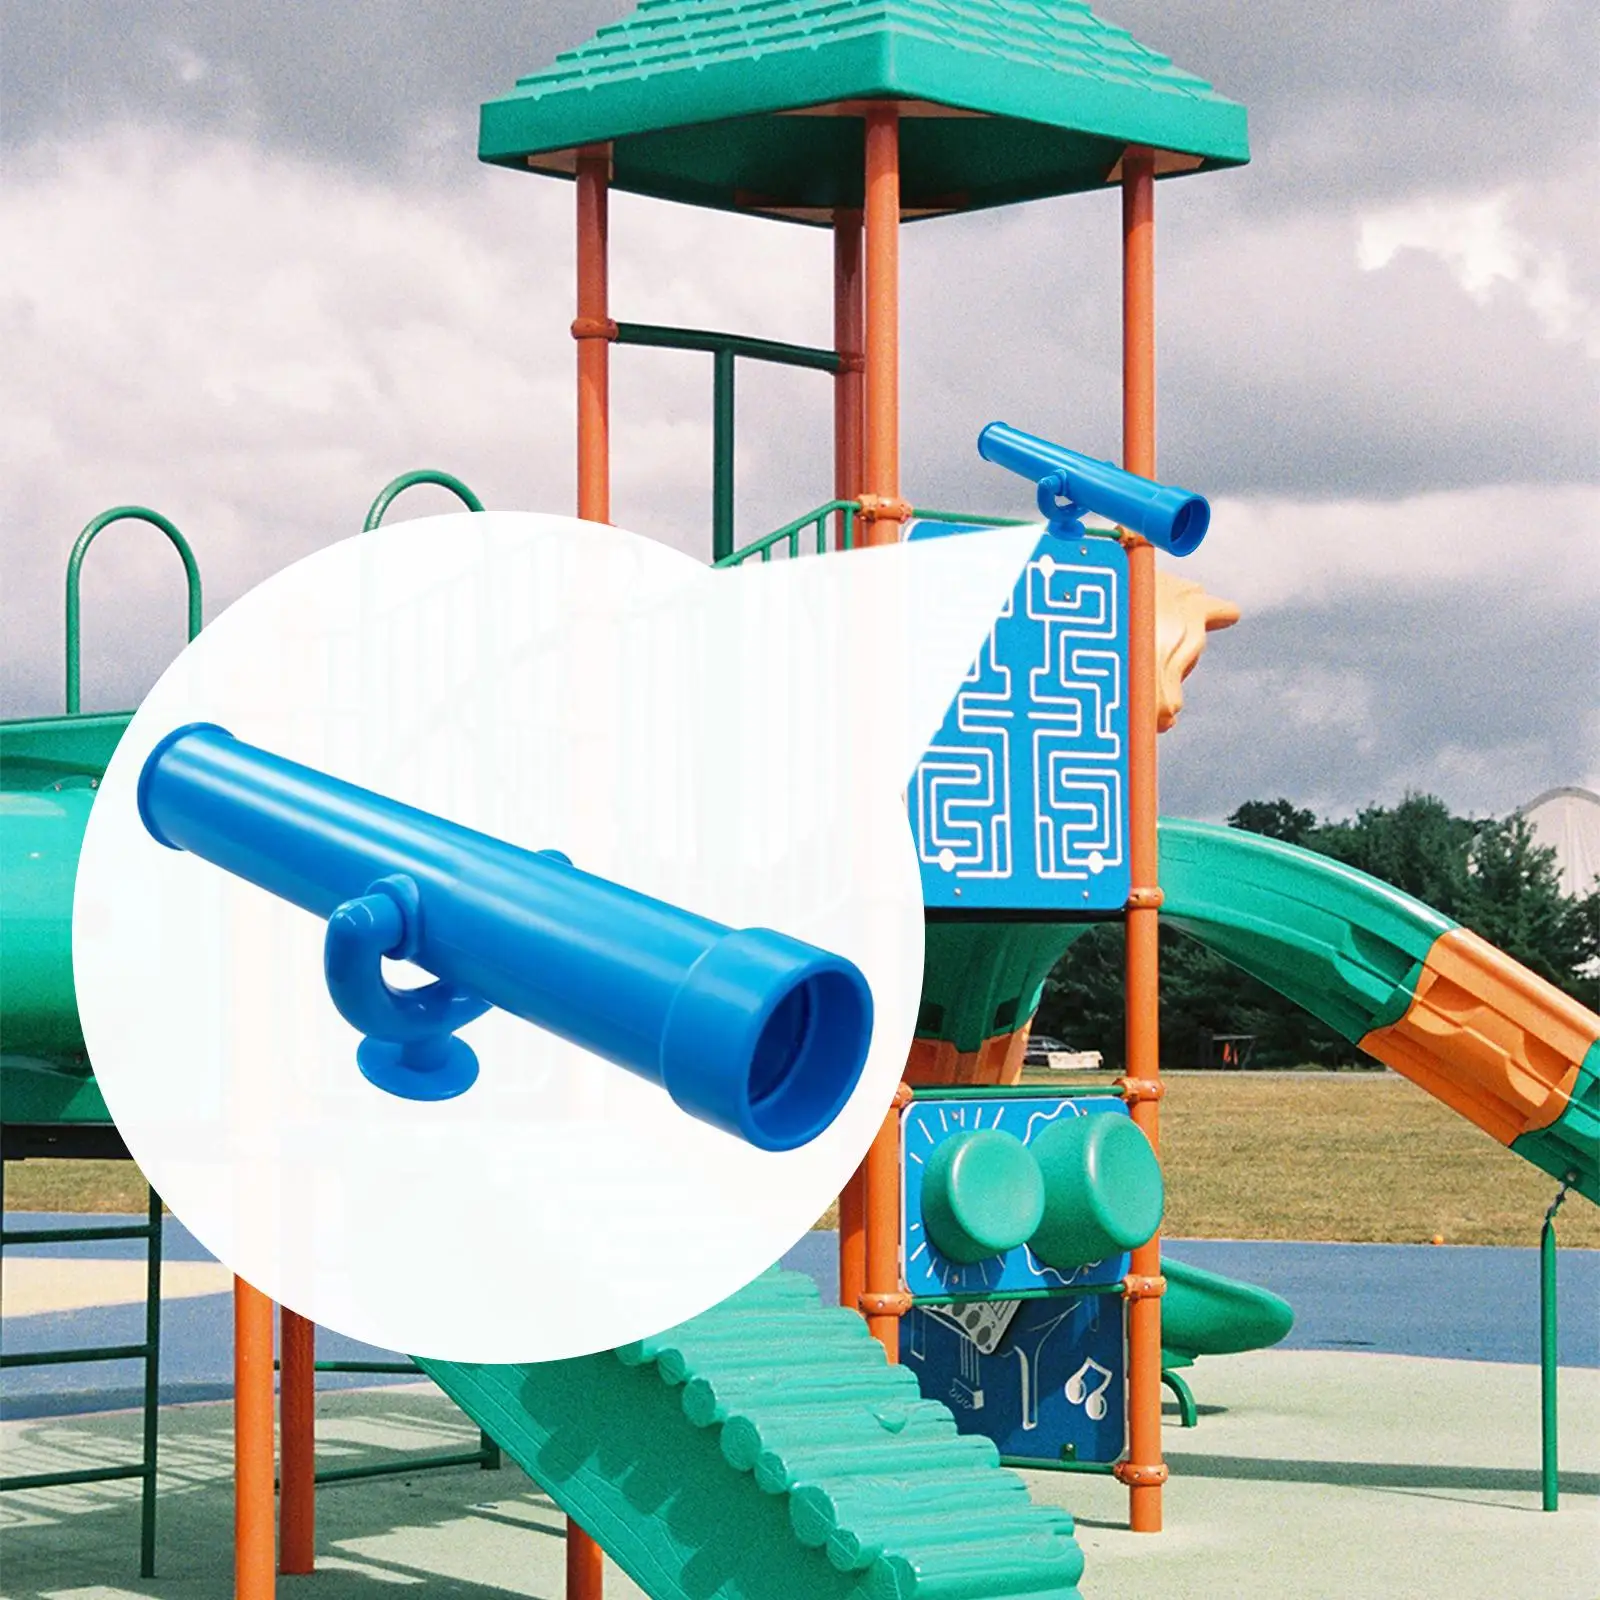 Playground Telescope Toy for Girls Boys Playground Accessories Pirate Ship Telescope for Gym Playhouse Jungle Backyard Outdoor